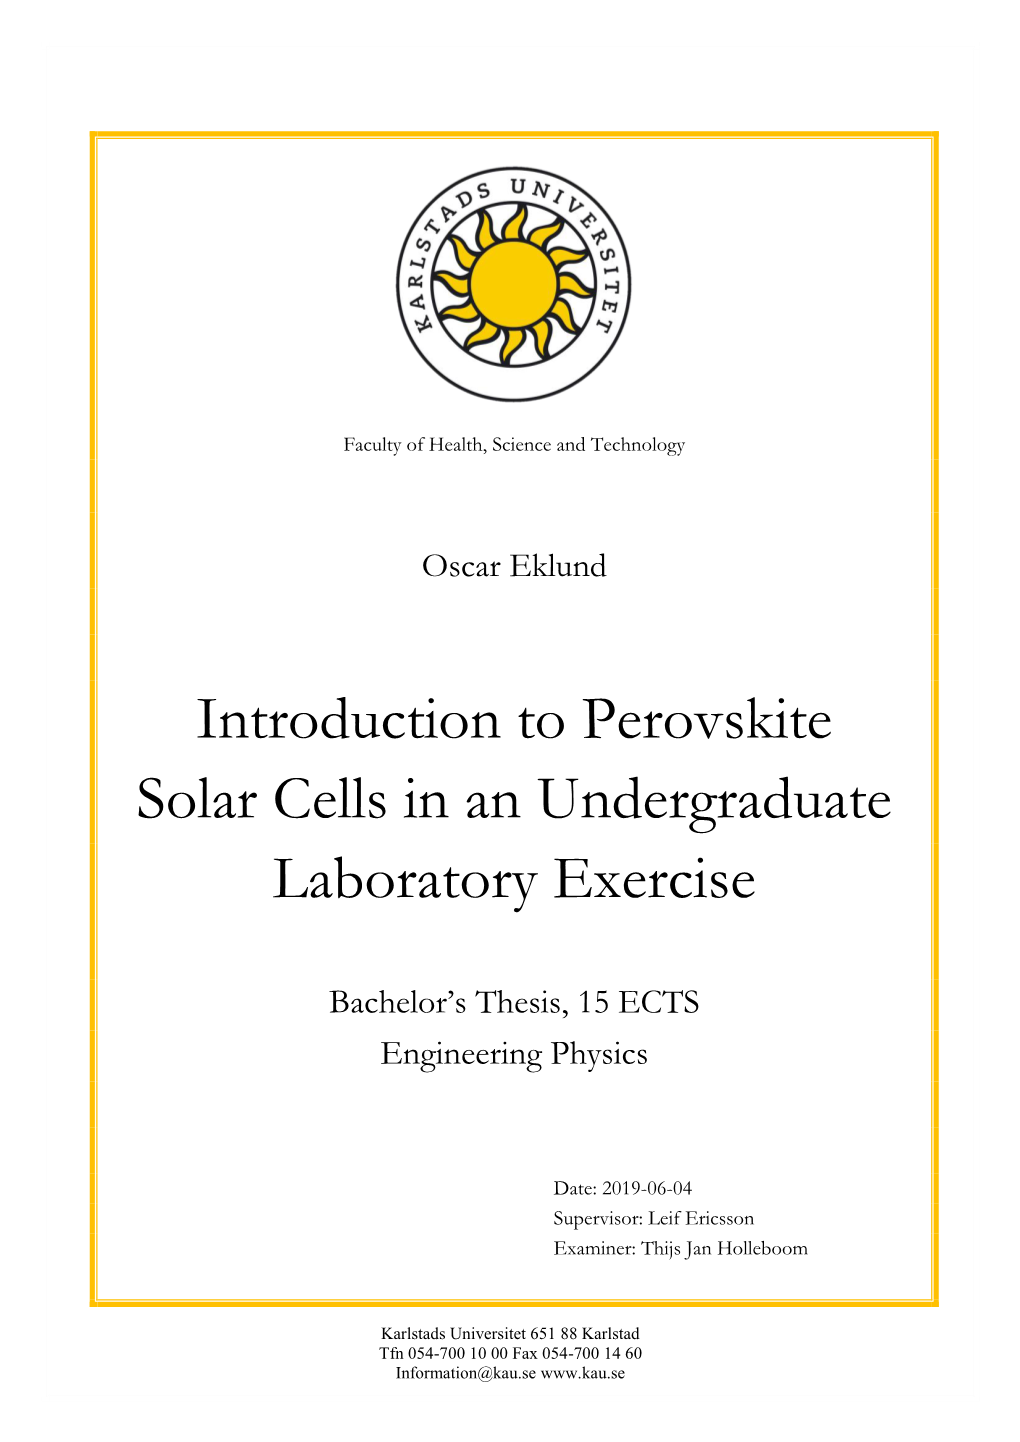 Introduction to Perovskite Solar Cells in an Undergraduate Laboratory Exercise